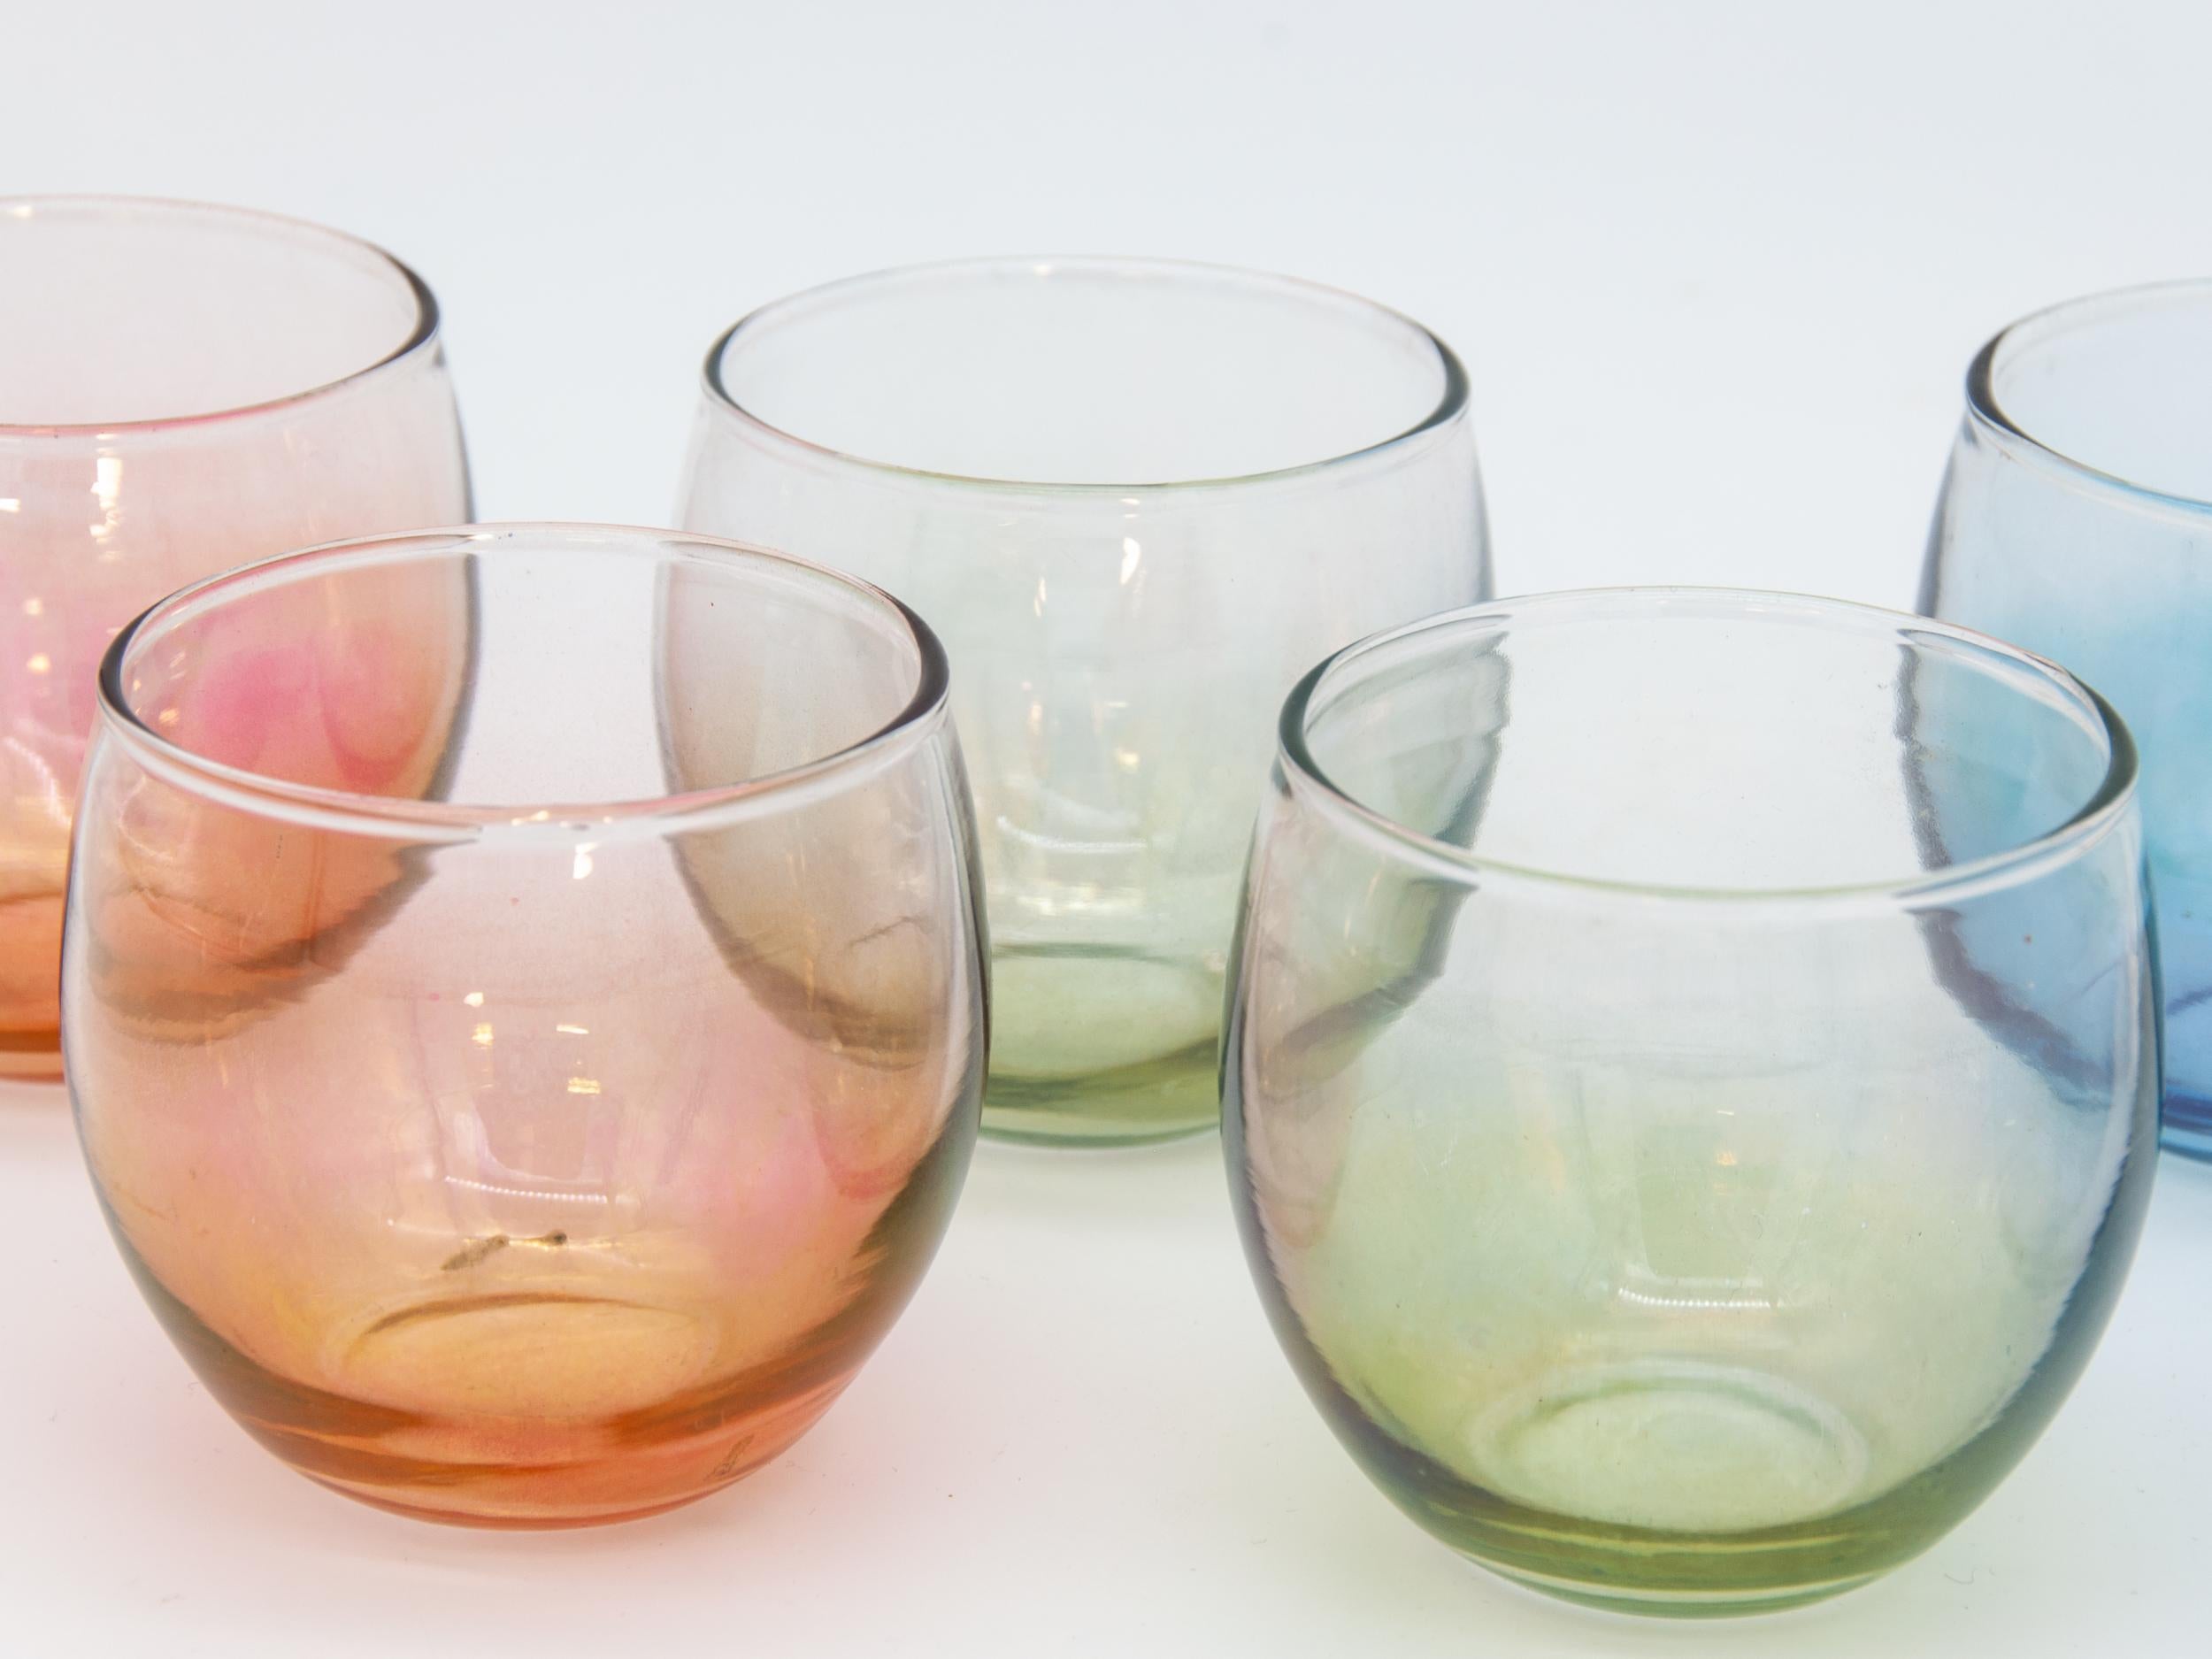 Unknown Set of Multi Colored Vintage Glasses in Carrier